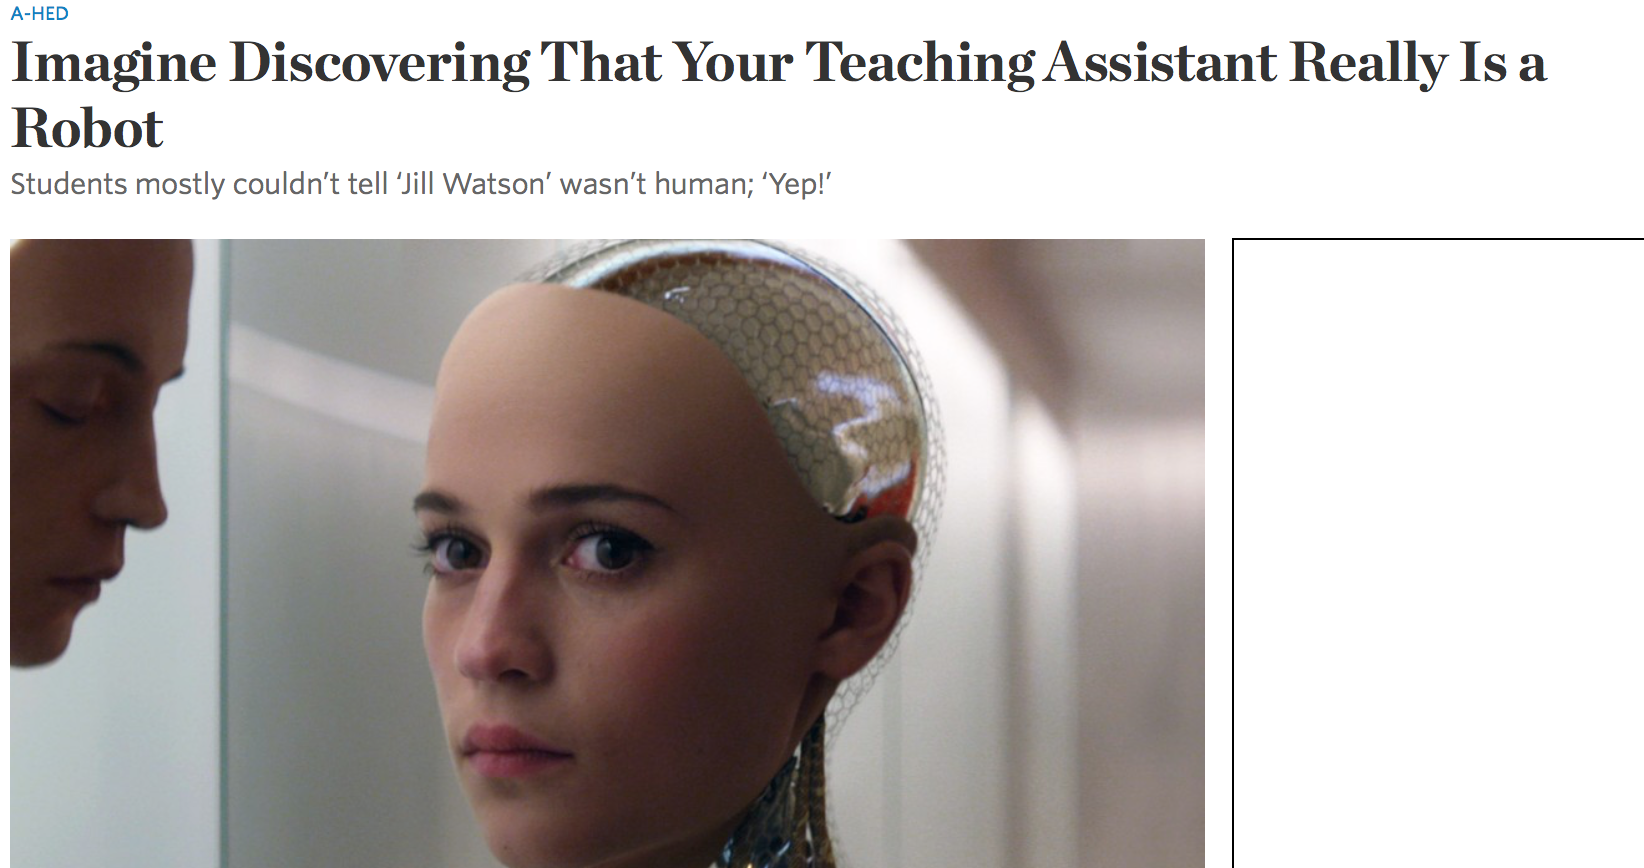 http://www.wsj.com/articles/if-your-teacher-sounds-like-a-robot-you-might-be-on-to-something-1462546621